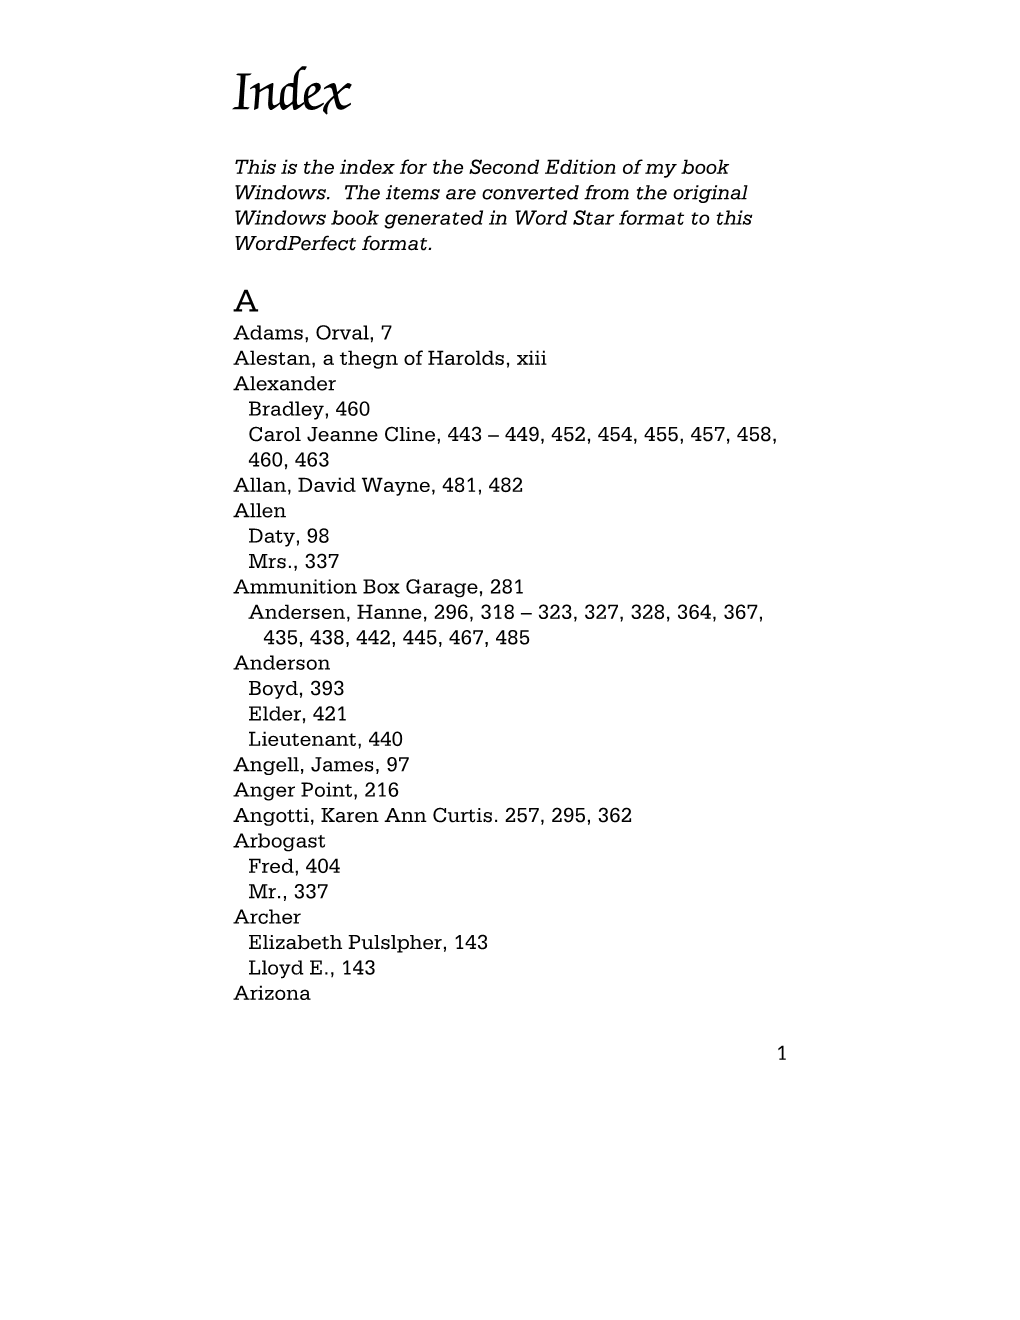 1 This Is the Index for the Second Edition of My Book Windows. The